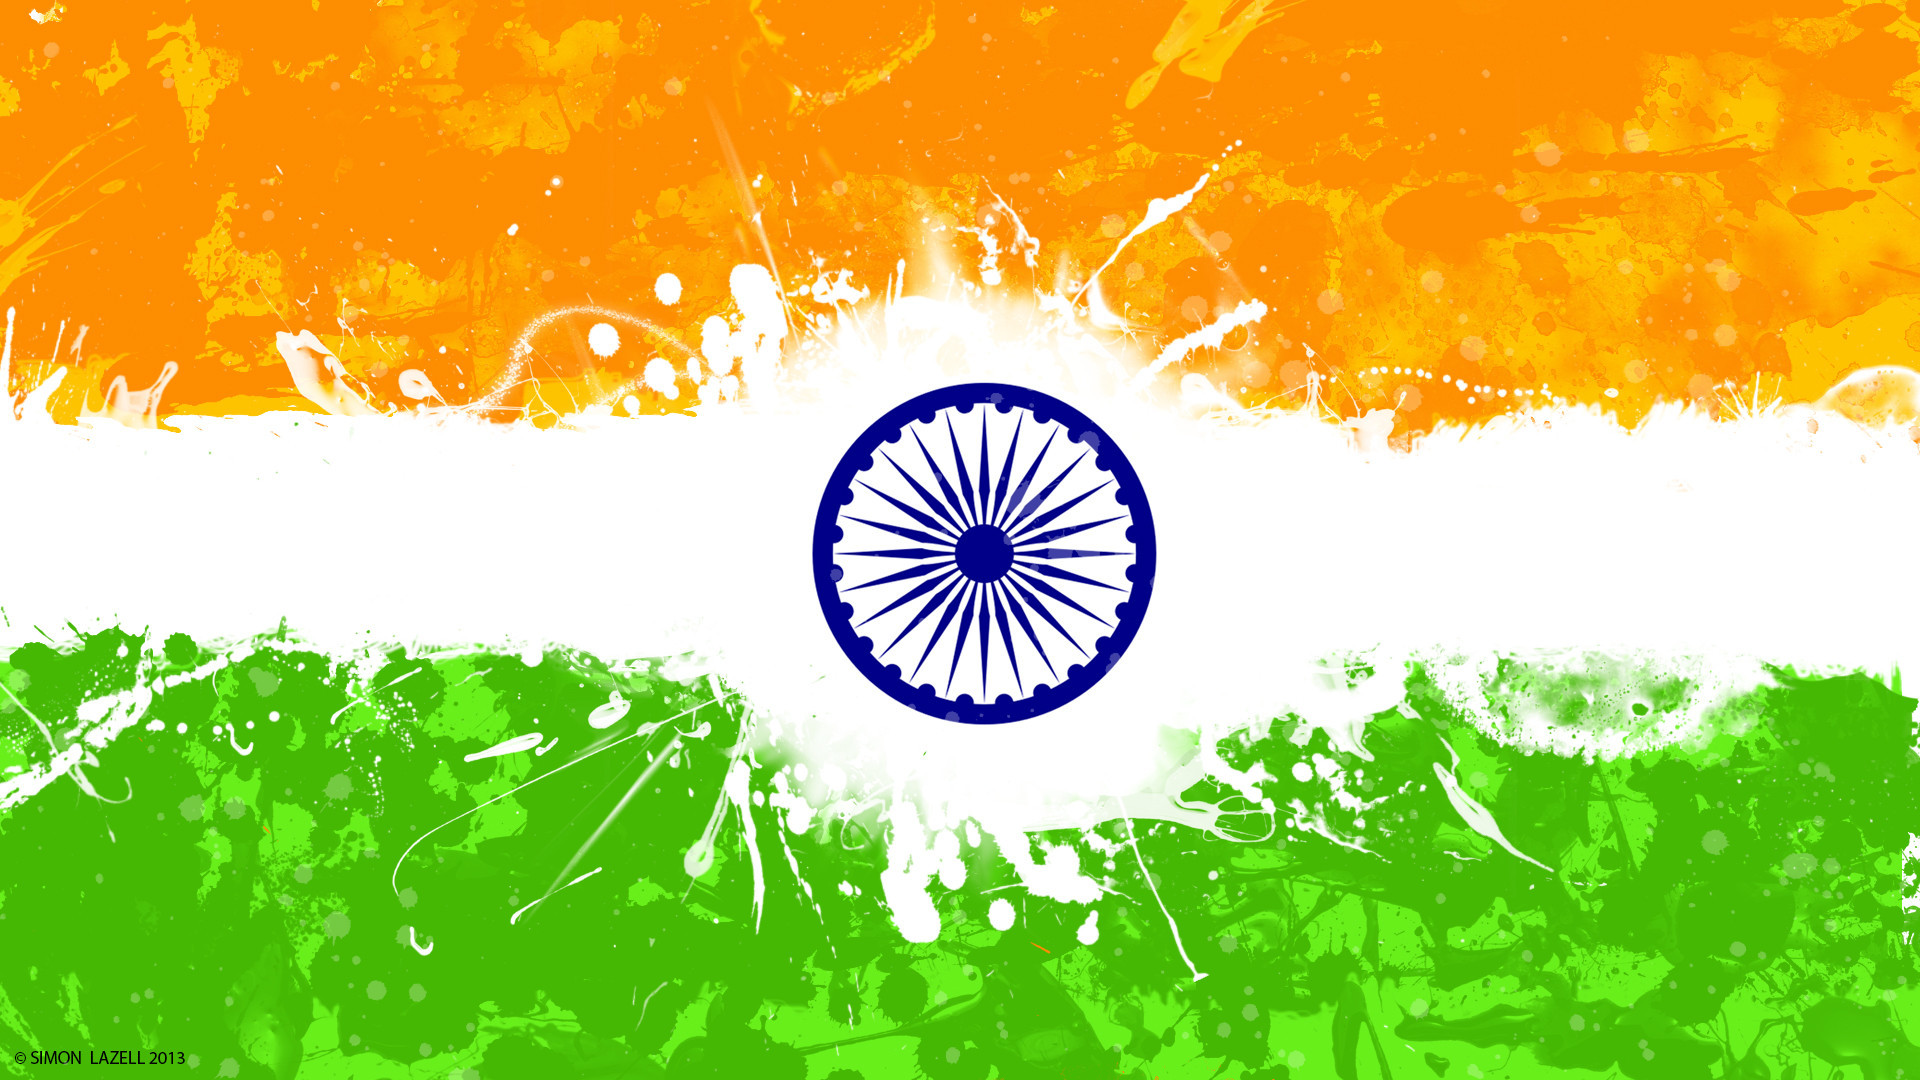 Indian Flag Wallpaper 2018 (67+ pictures)